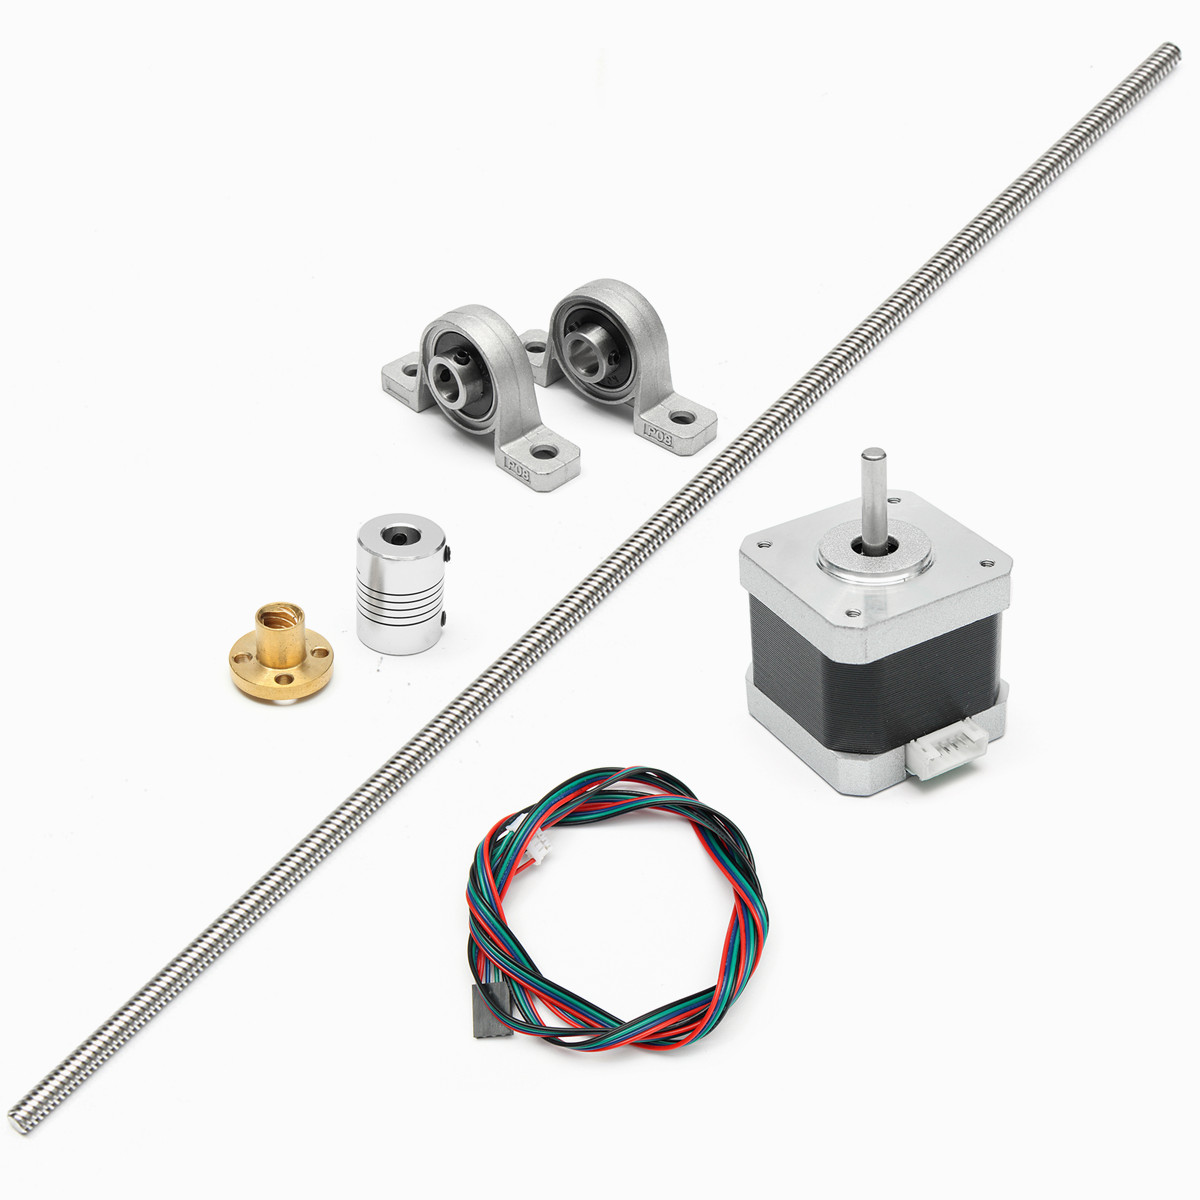 T8 600mm Stainless Steel Lead Screw Coupling Shaft Mounting + Motor For 3D Printer 30